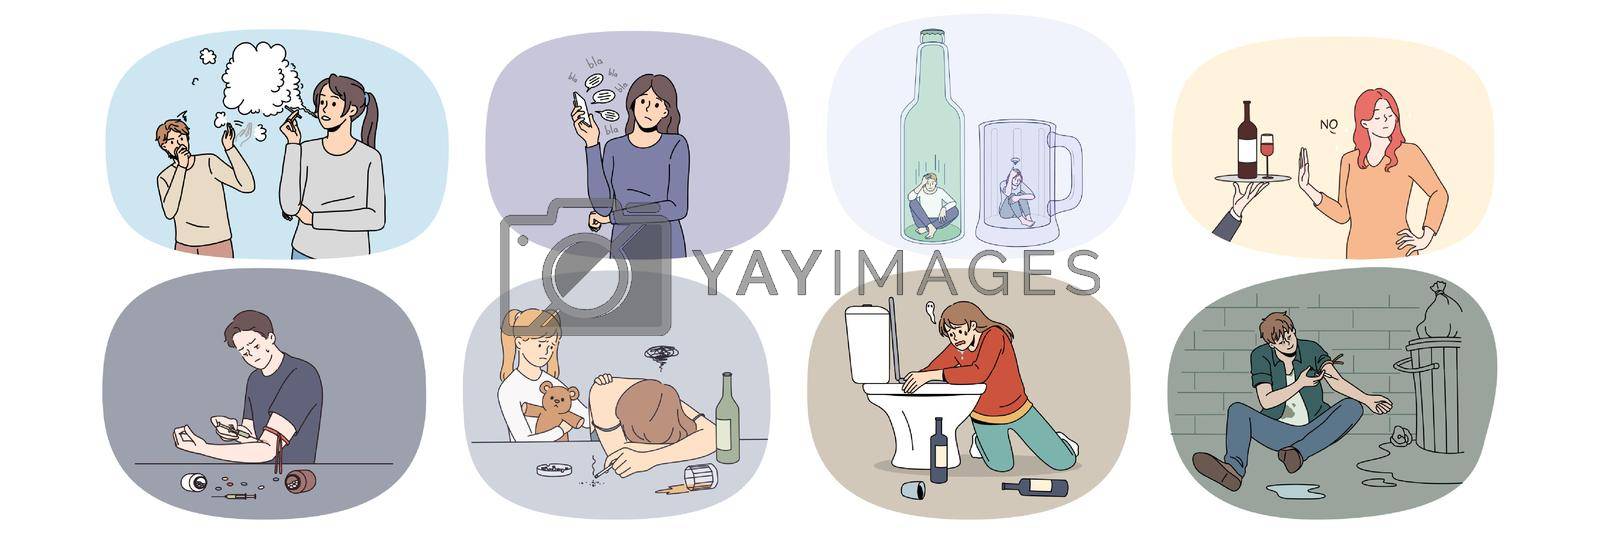 Set of unhappy diverse people suffering from addictions. Collection of men and women struggling with drug and alcohol addictive behavior. Healthcare and bad habits. Vector illustration.